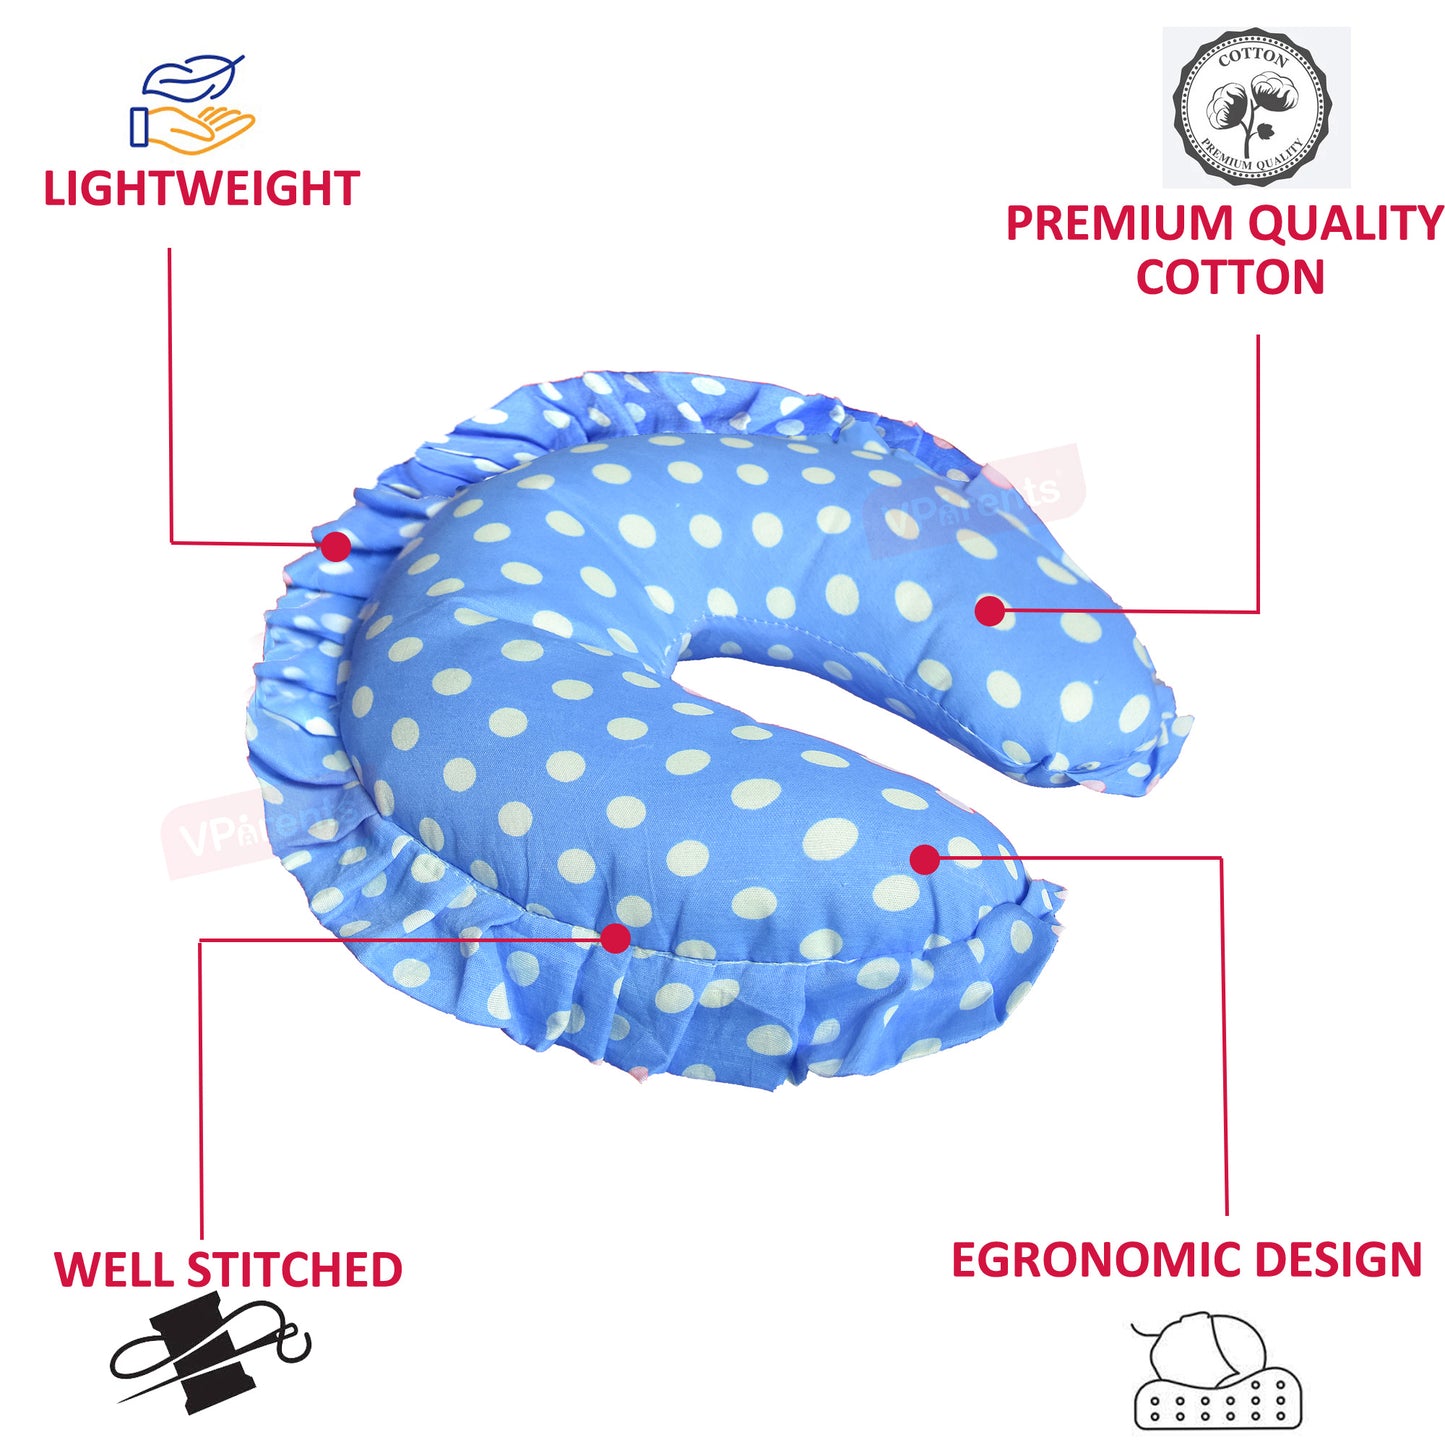 VParents Toddler Neck Support Soft Pillow for New Born Baby U Shape Pillow